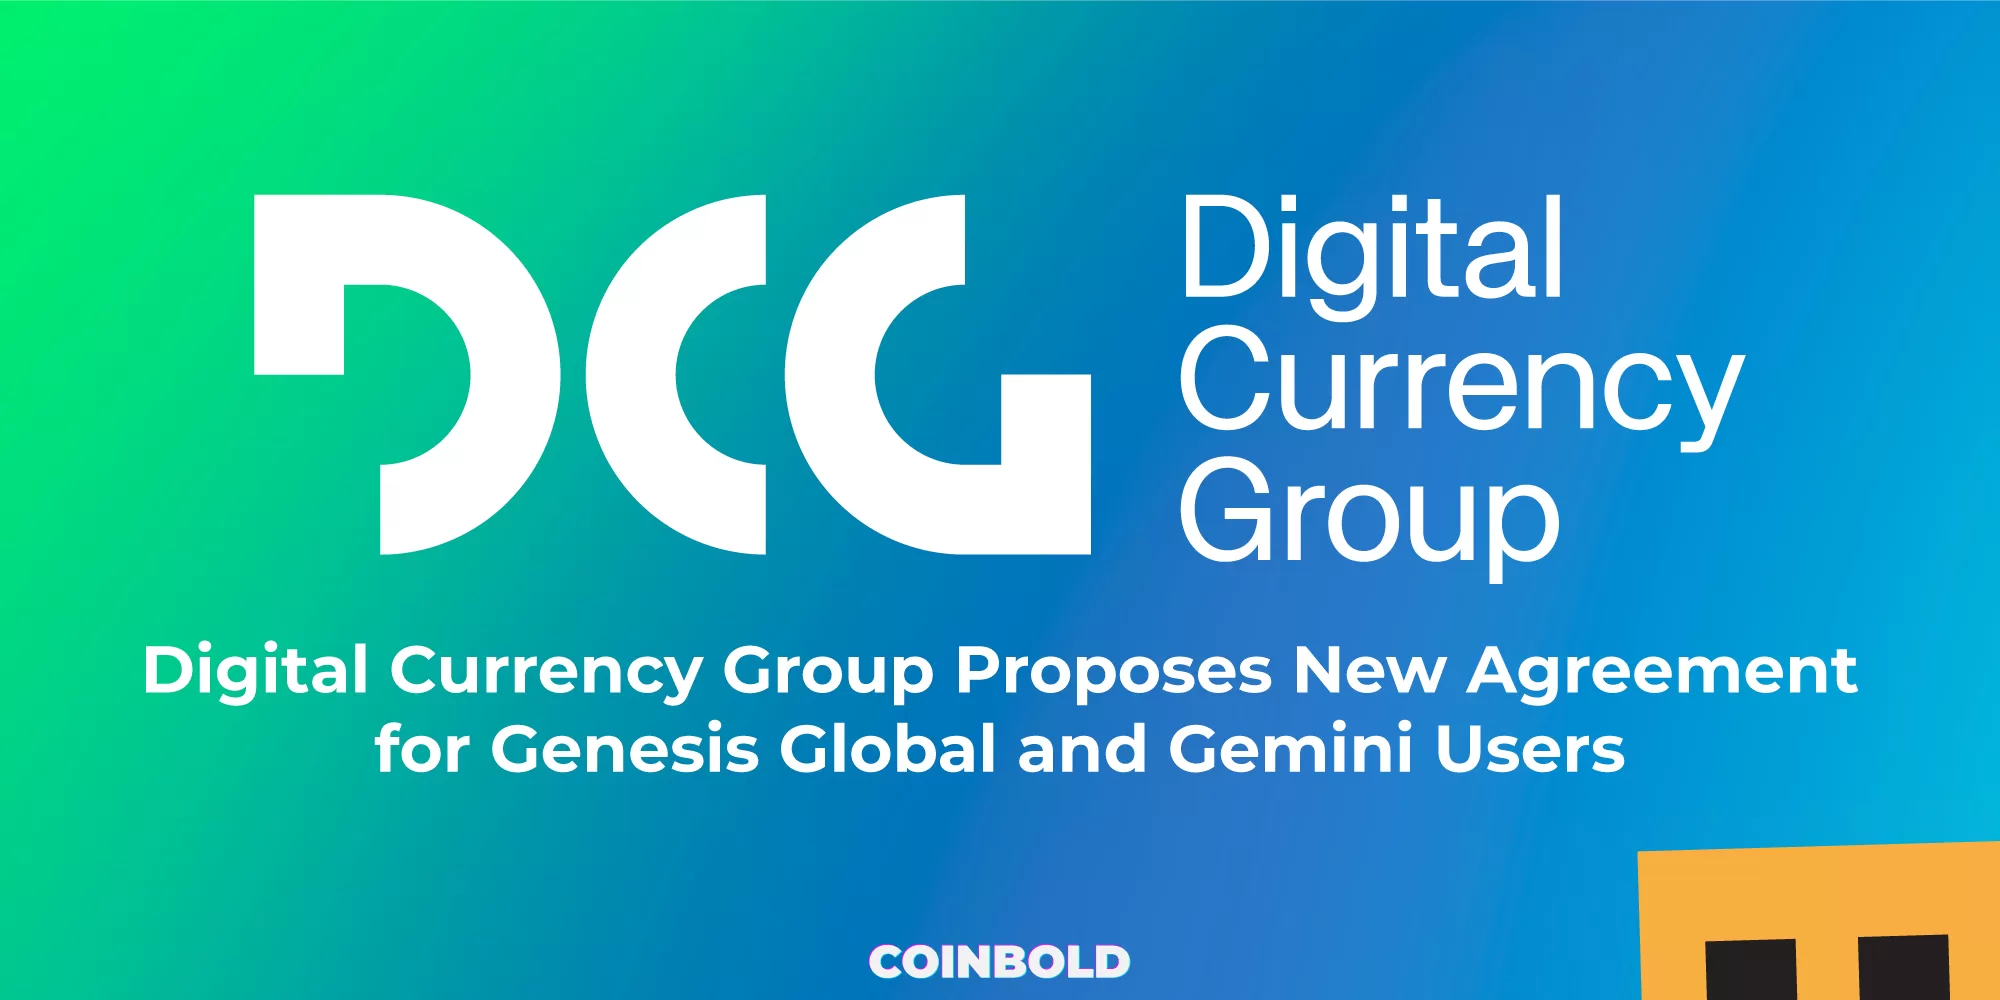 Digital Currency Group Proposes New Agreement for Genesis Global and Gemini Users